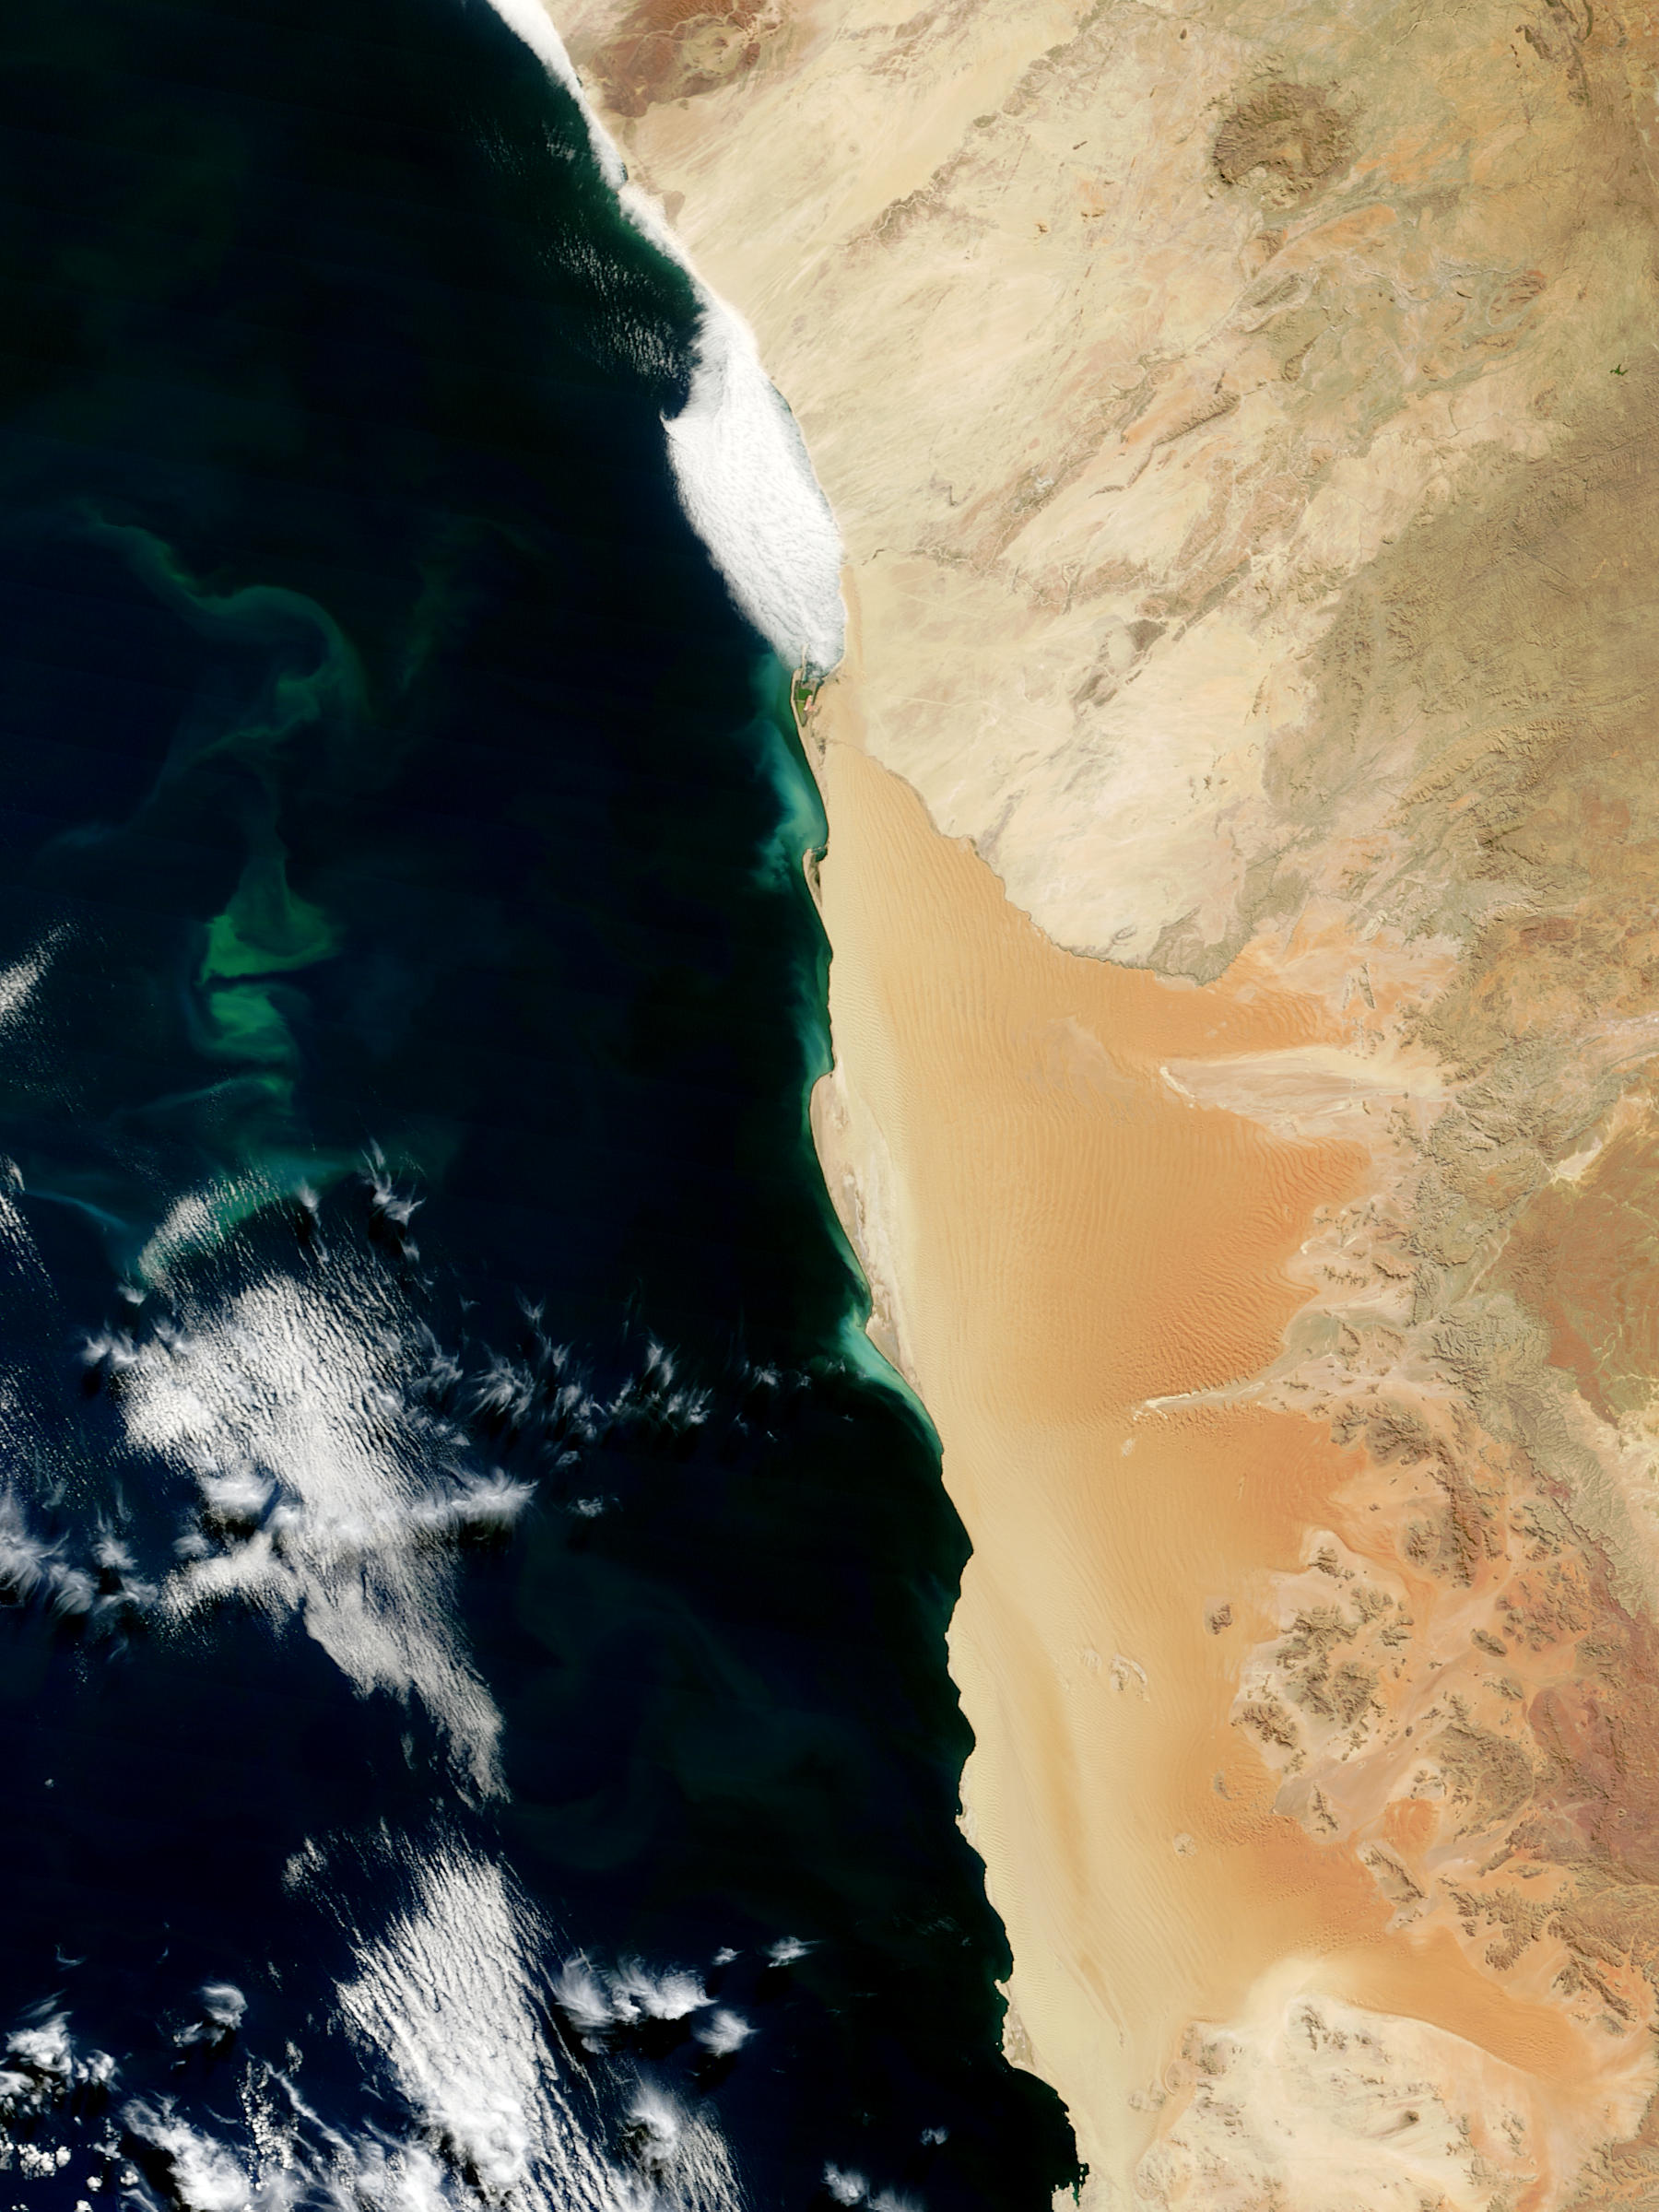 Hydrogen Sulfide Eruptions Along the Coast of Namibia - related image preview